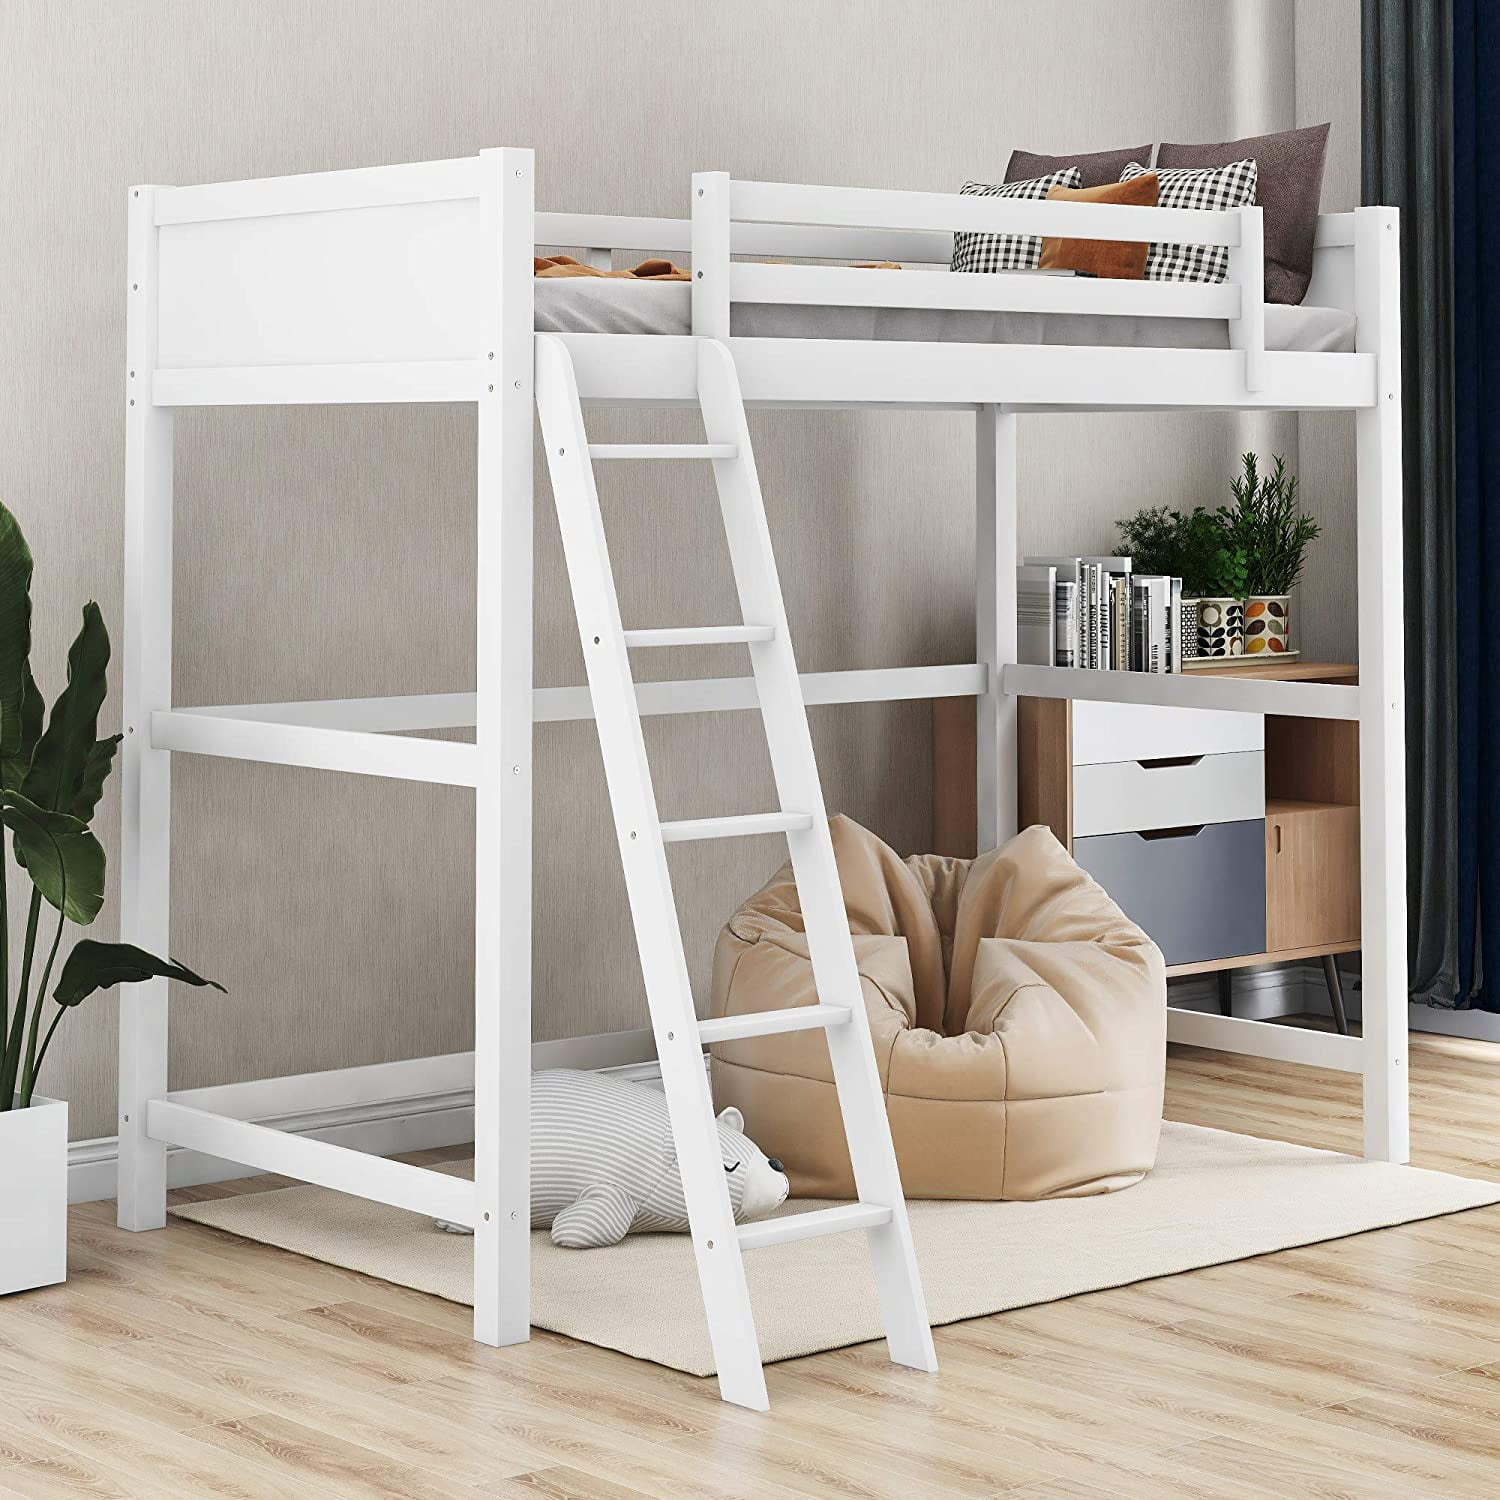 Modernluxe Panel Style Solid Wood Loft, Bunk Bed Ladder Hardware